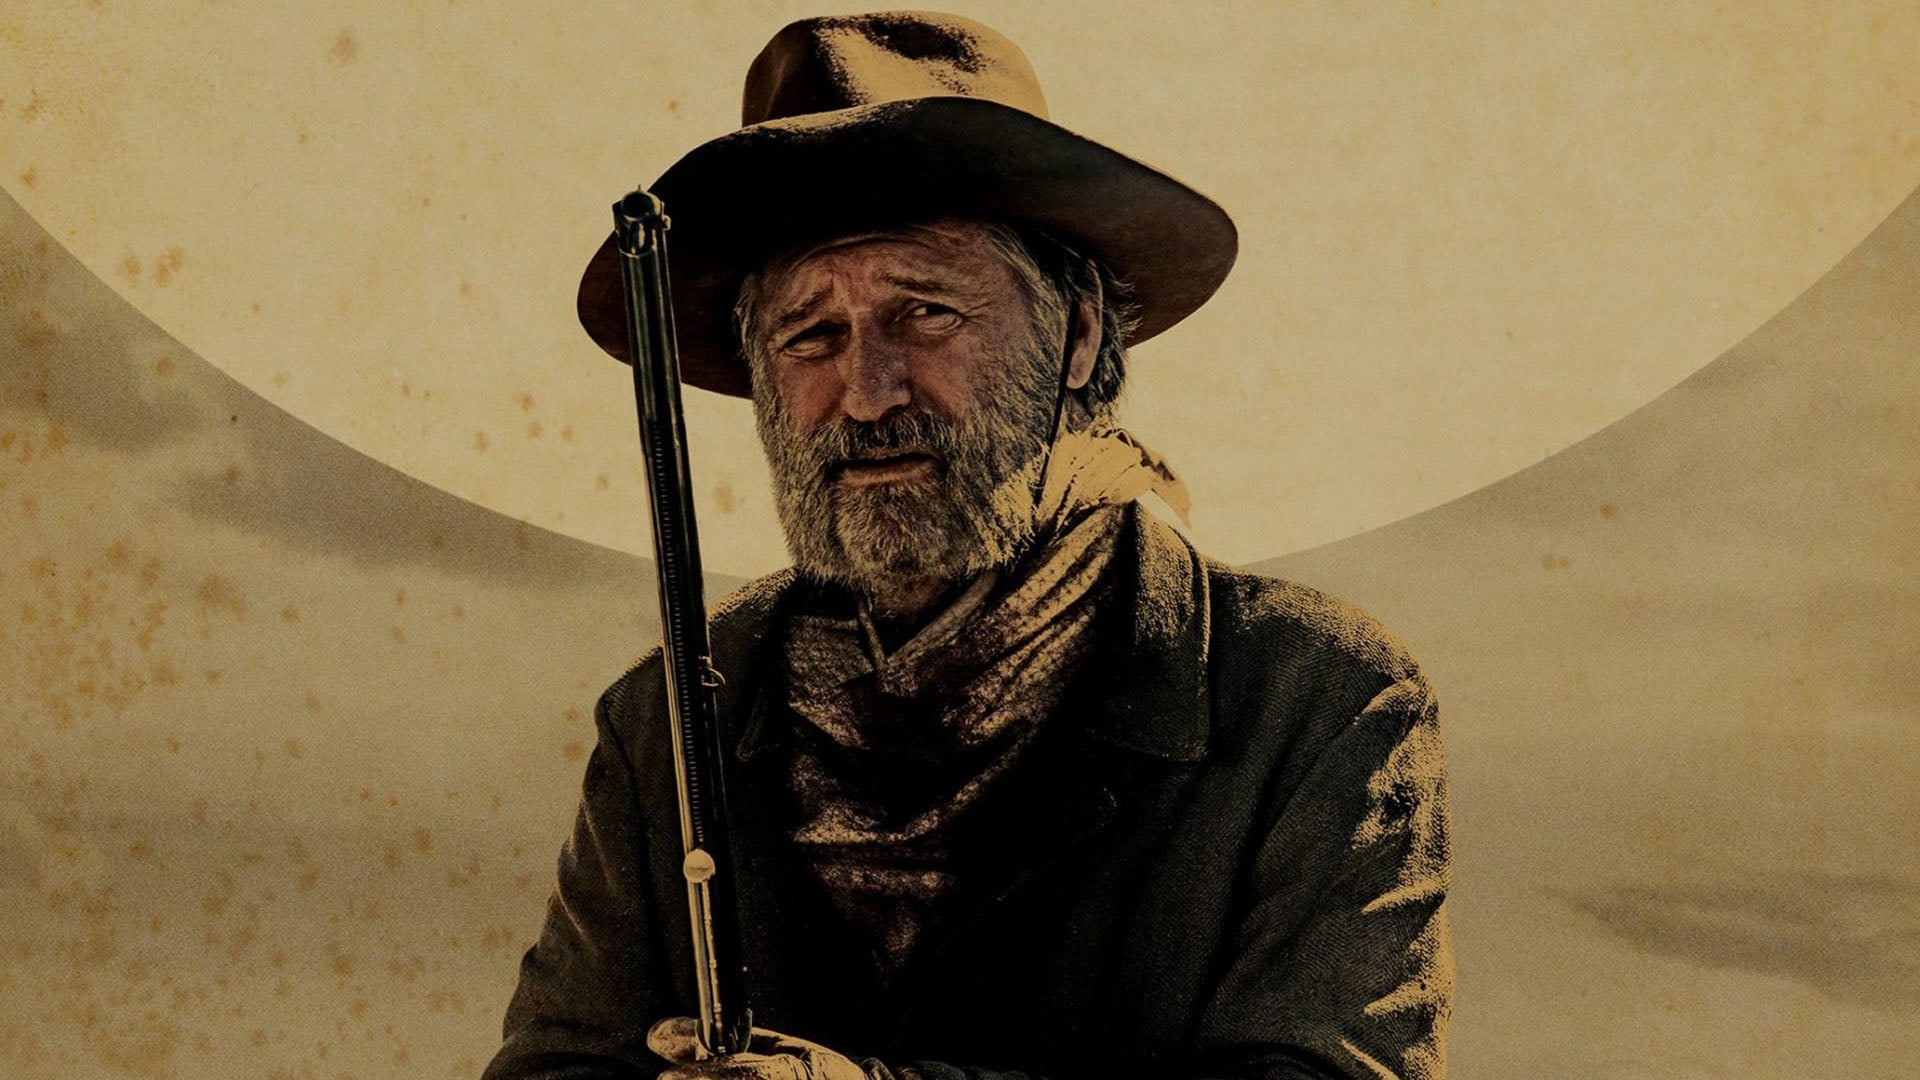 The Ballad of Lefty Brown - film